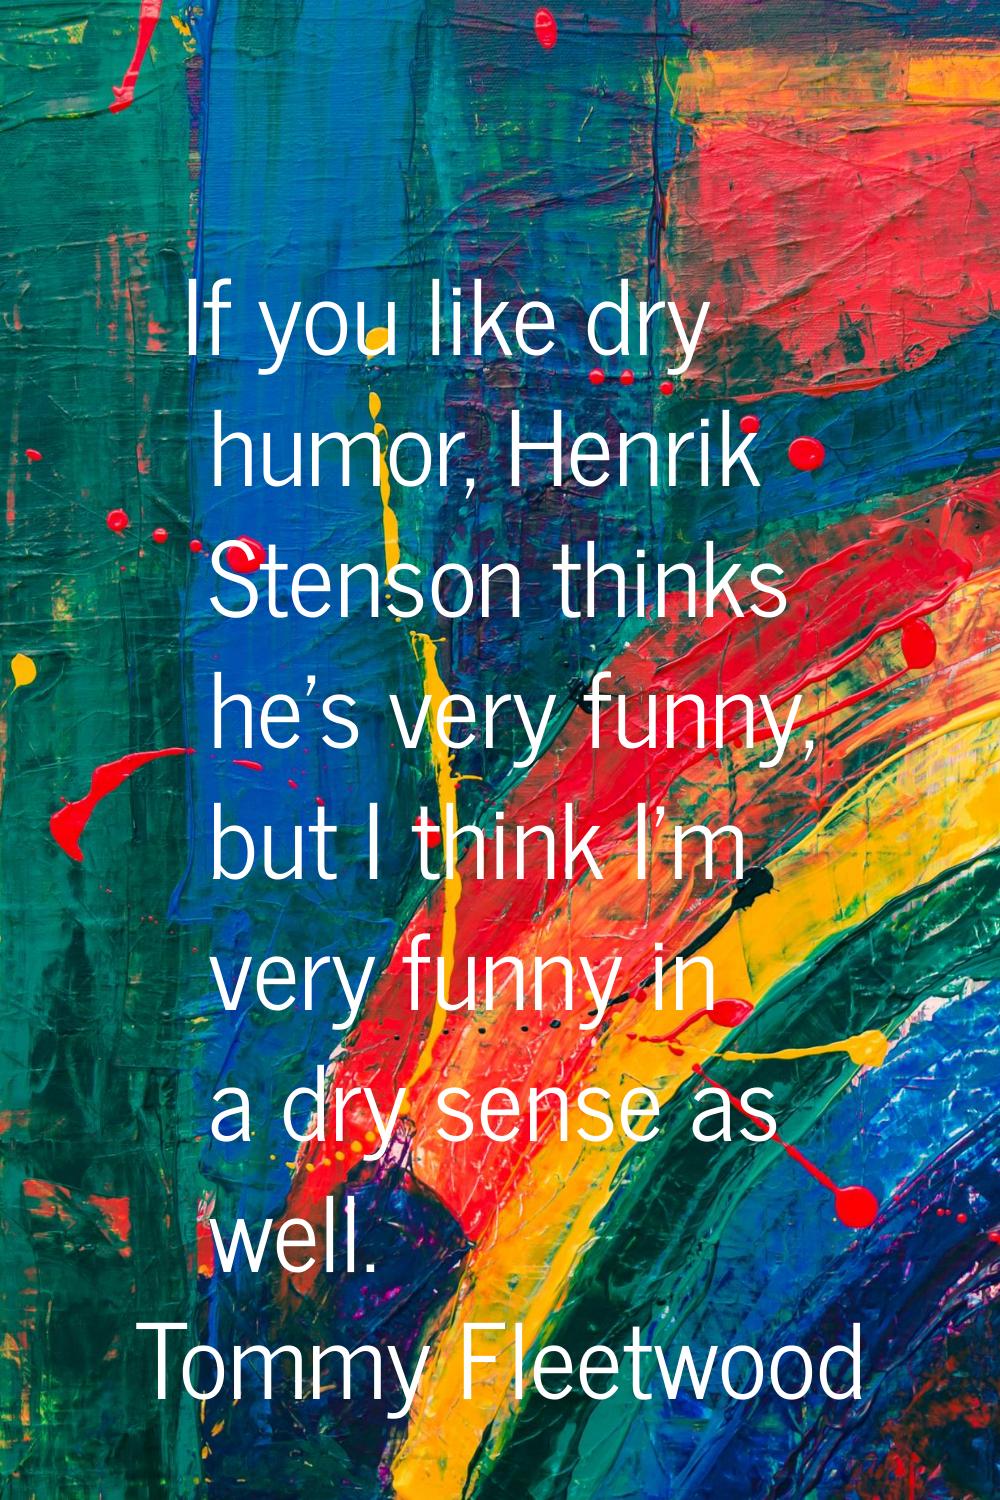 If you like dry humor, Henrik Stenson thinks he's very funny, but I think I'm very funny in a dry s